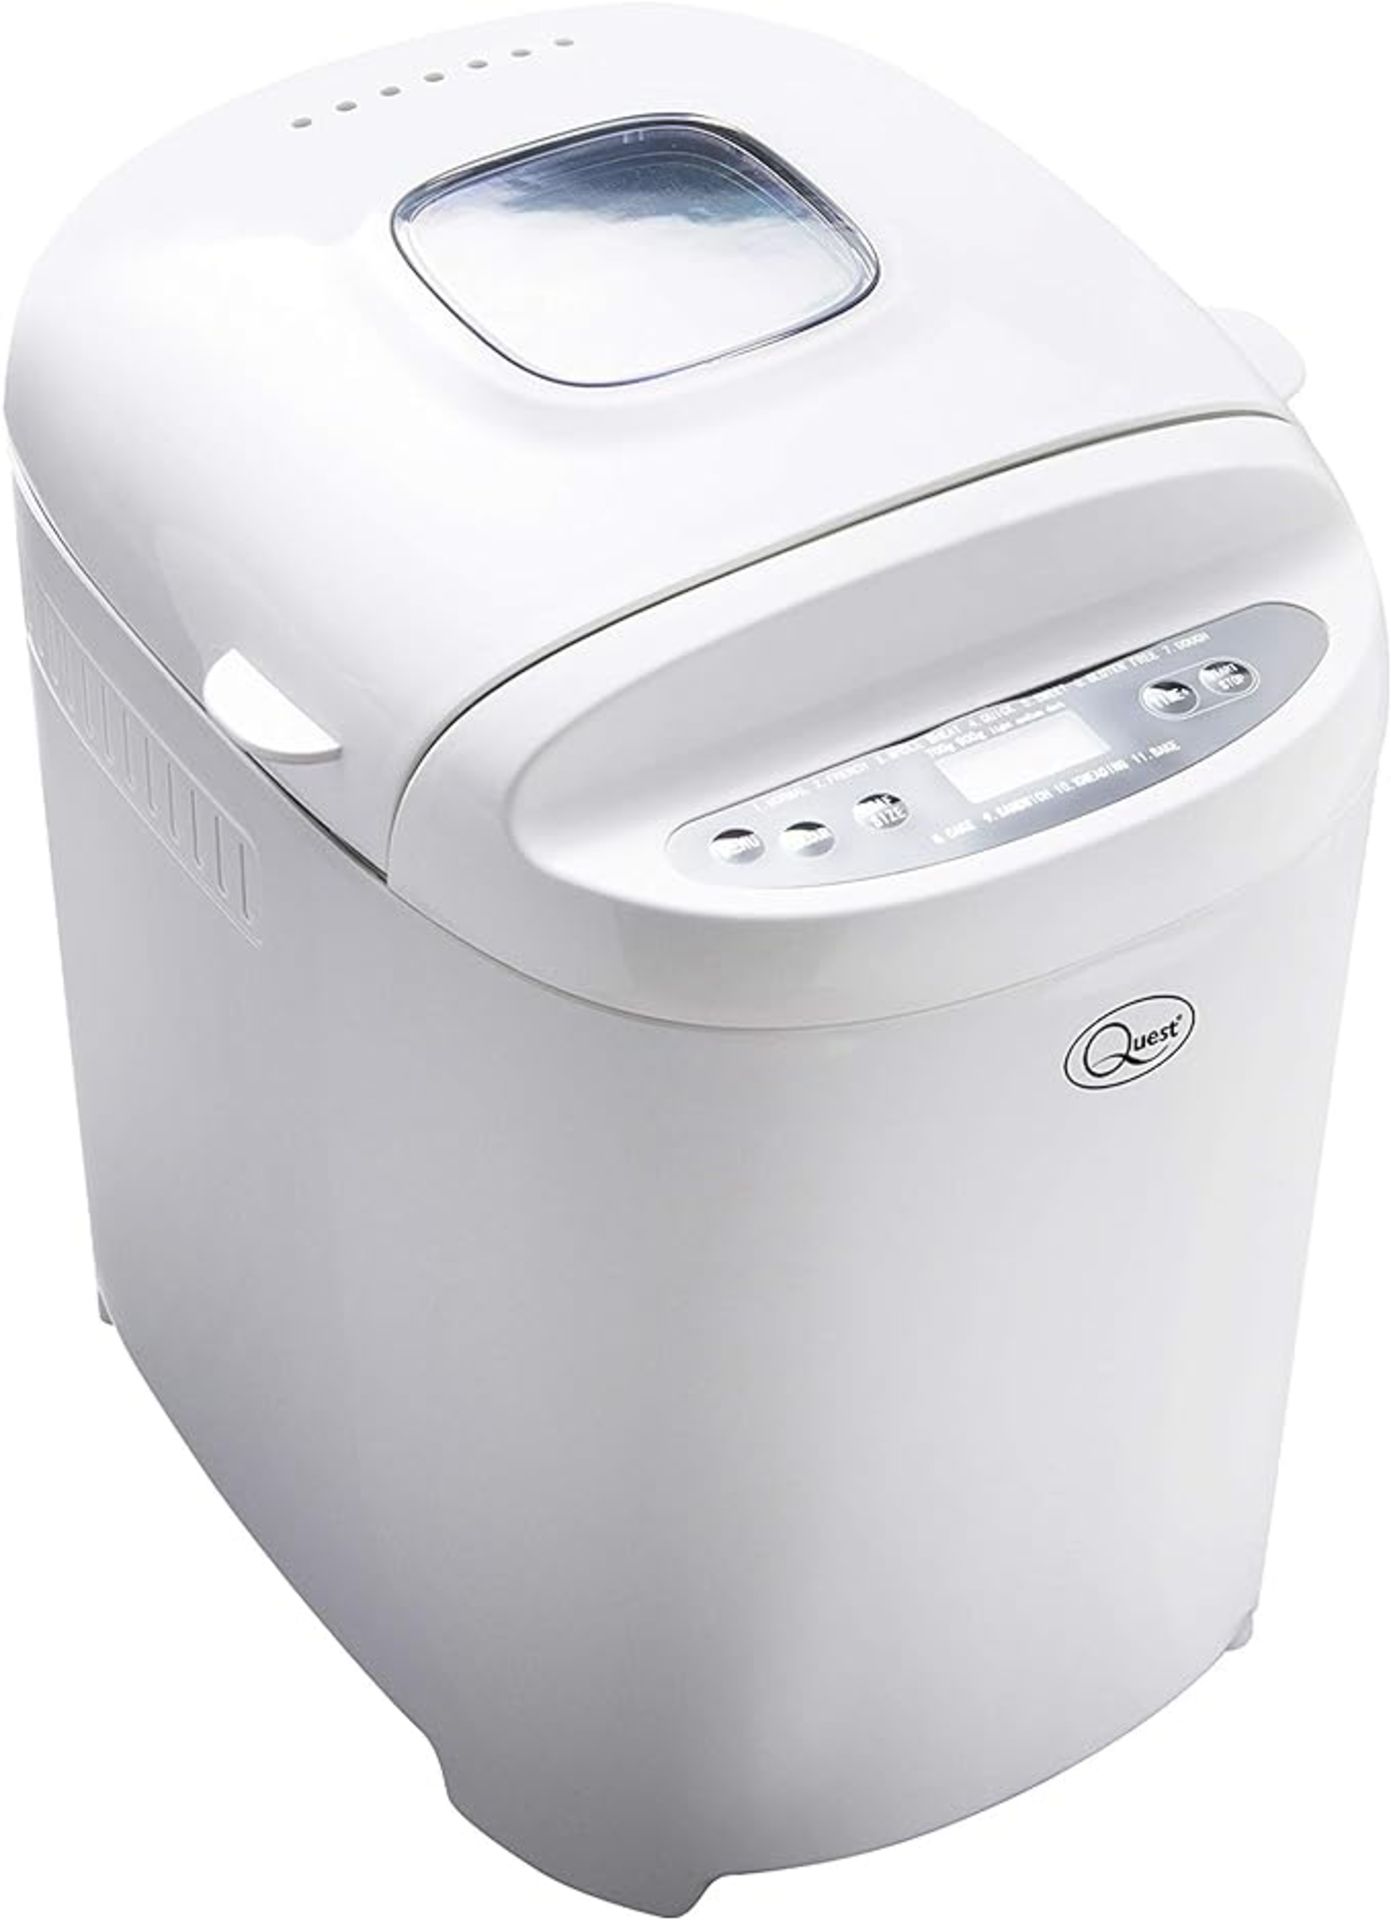 Quest 34039 Bread Maker / 11 Settings / 900g Capacity/Delay Timer, Keep Warm and Memory